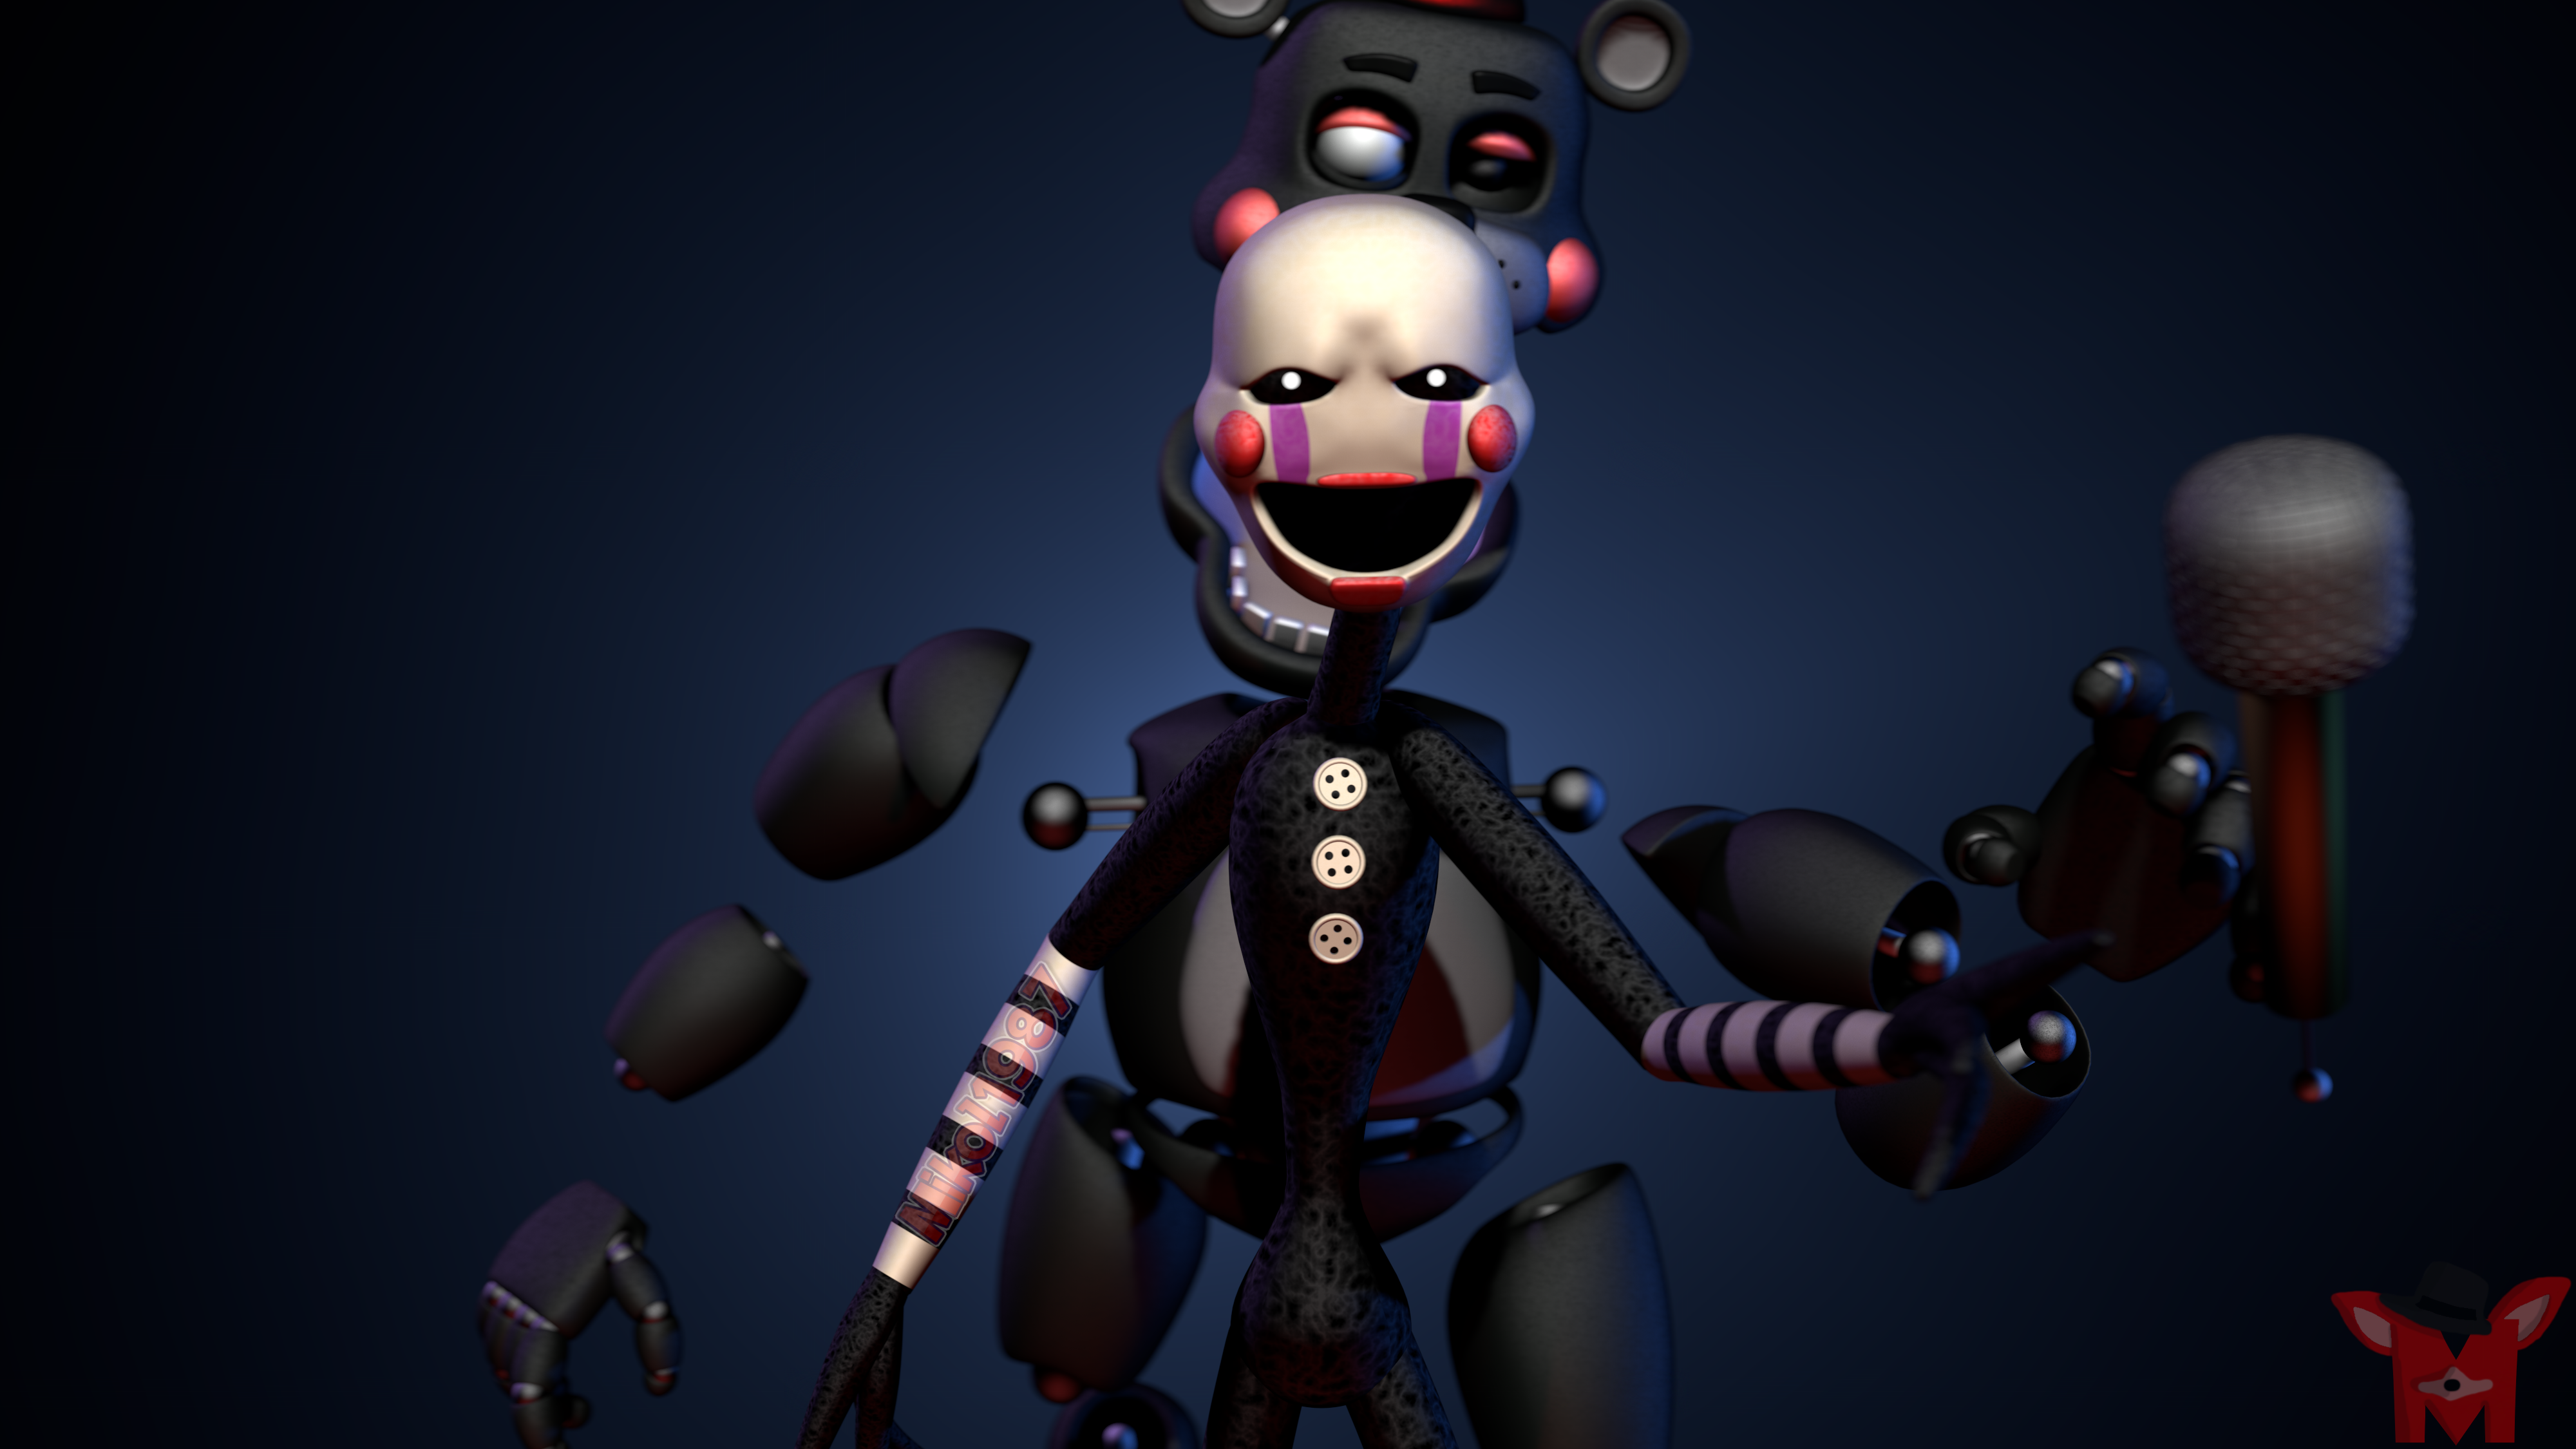 A creepy HD desktop wallpaper featuring the Puppet character from the video game Five Nights at Freddy's 2, set in Freddy Fazbear's Pizzeria Simulator.